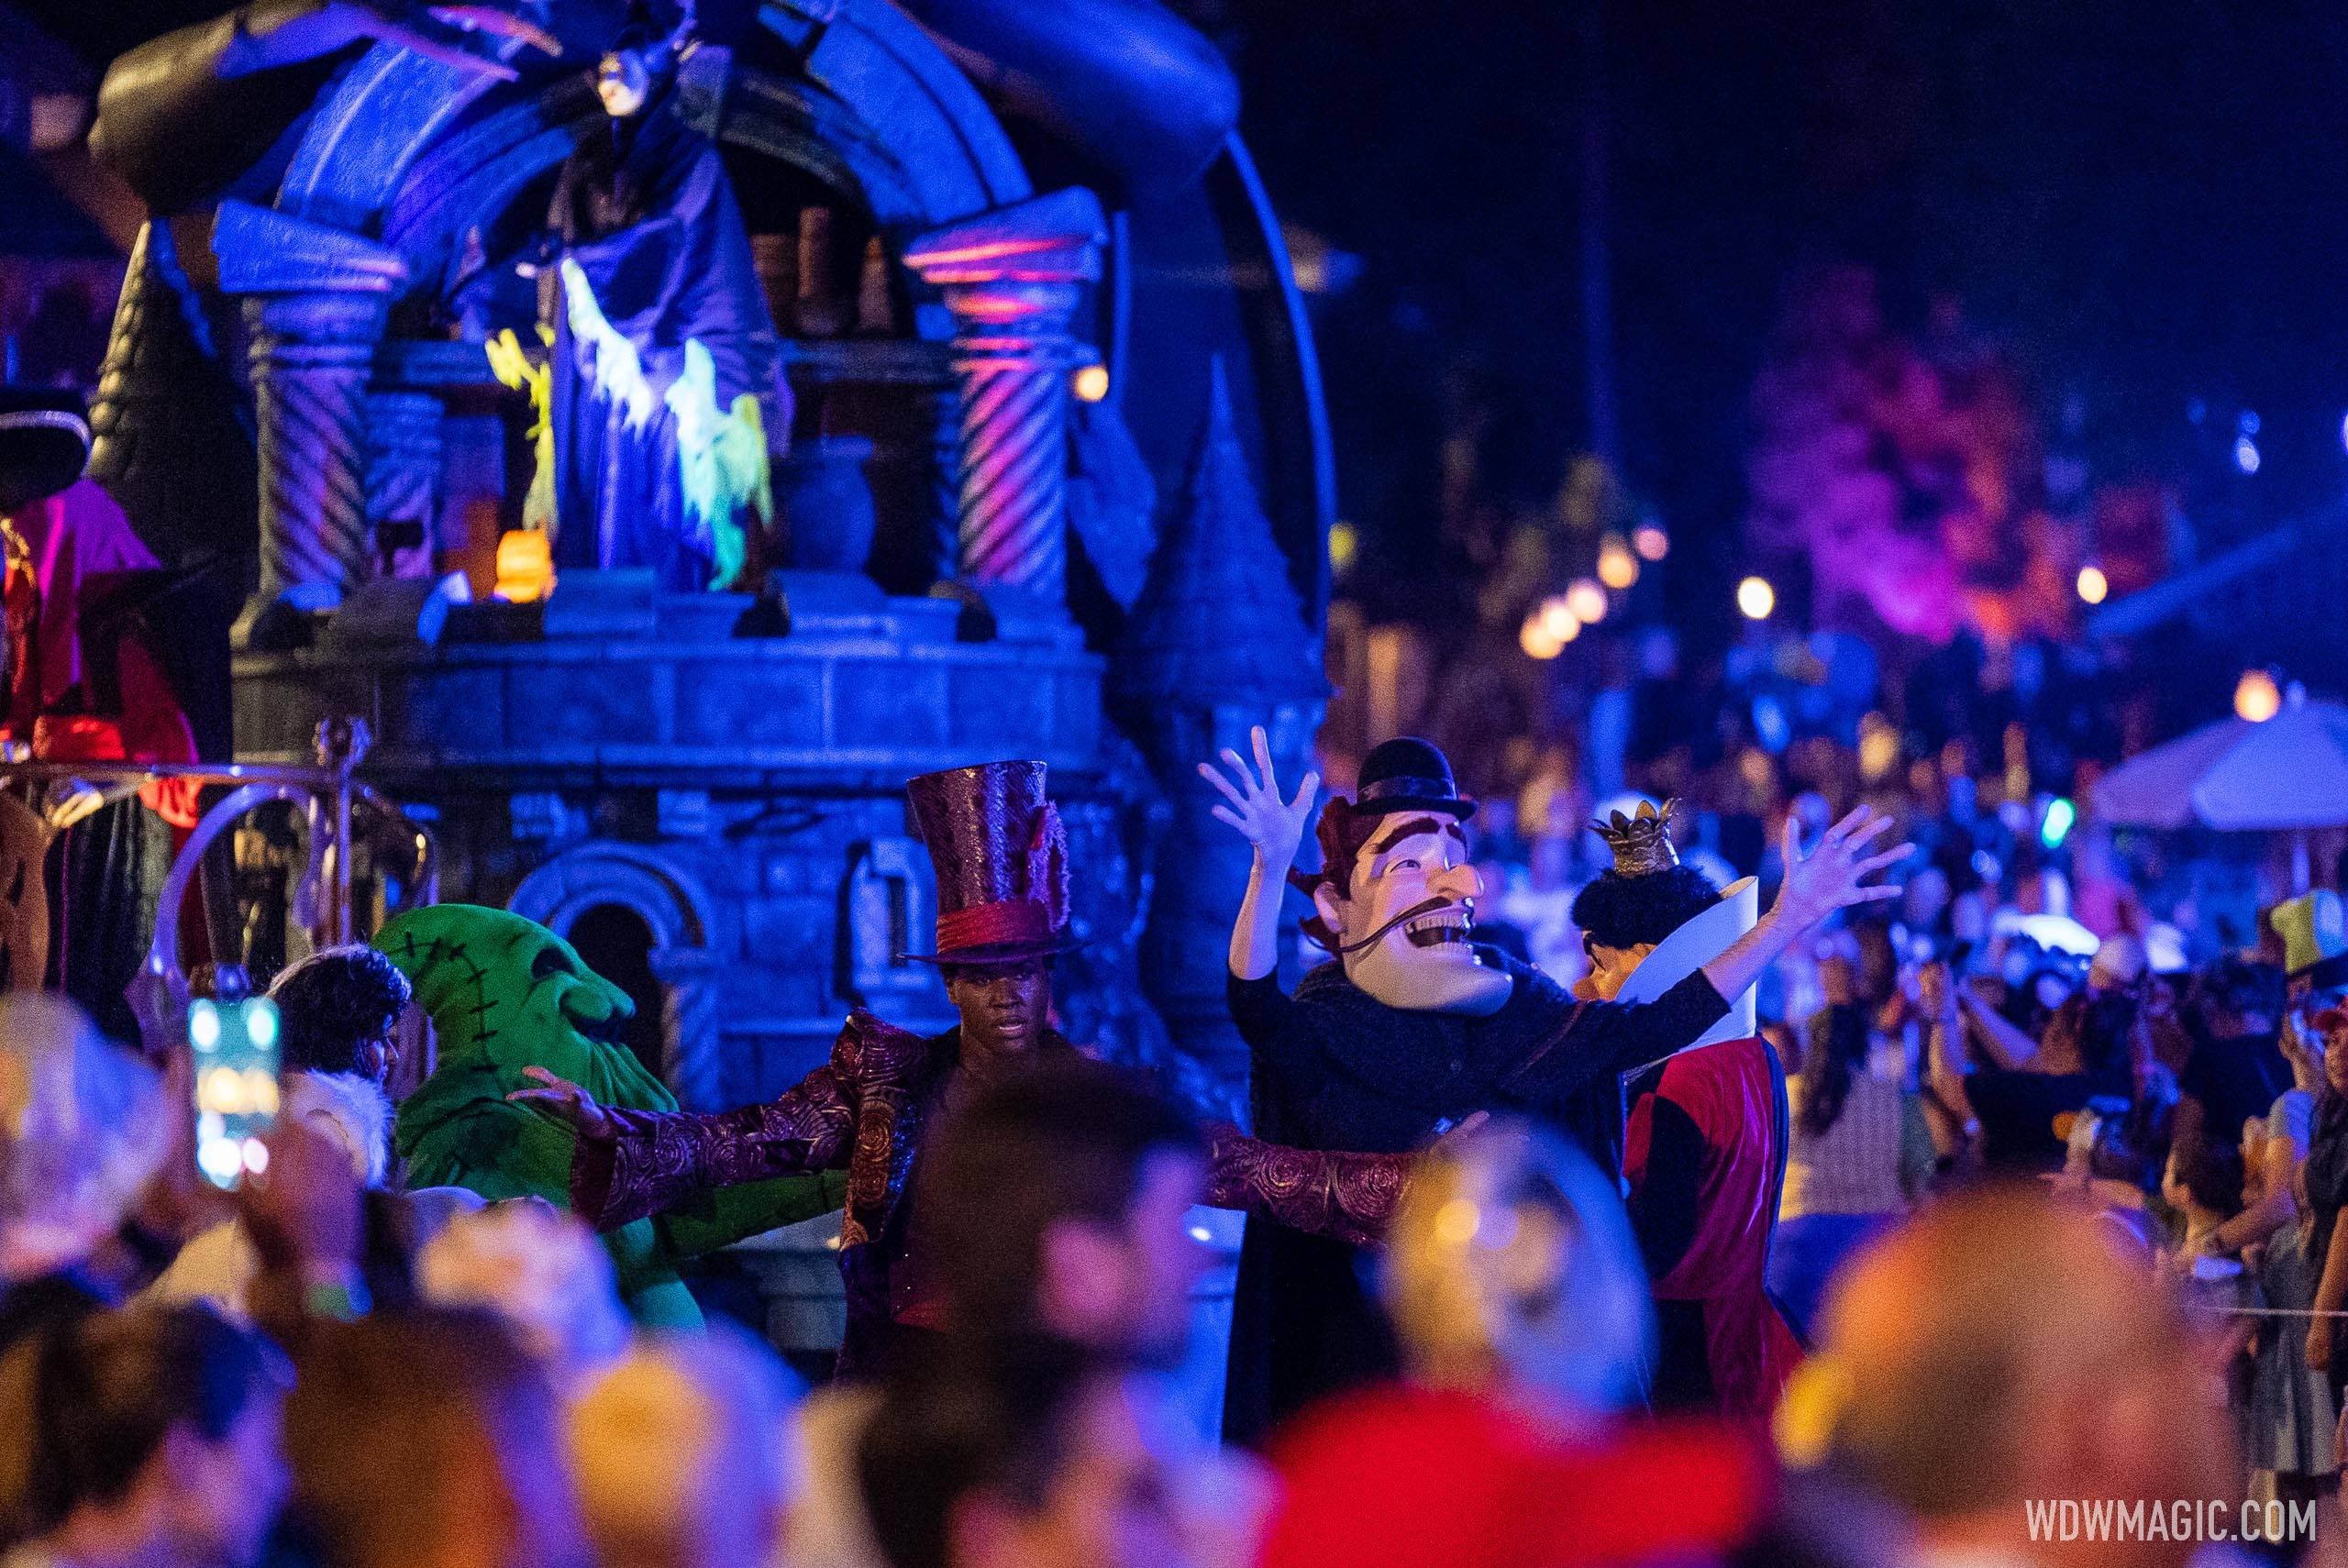 HAPPY HALLOWEEN! - Mickey’s Boo-to-You Halloween Parade video now available